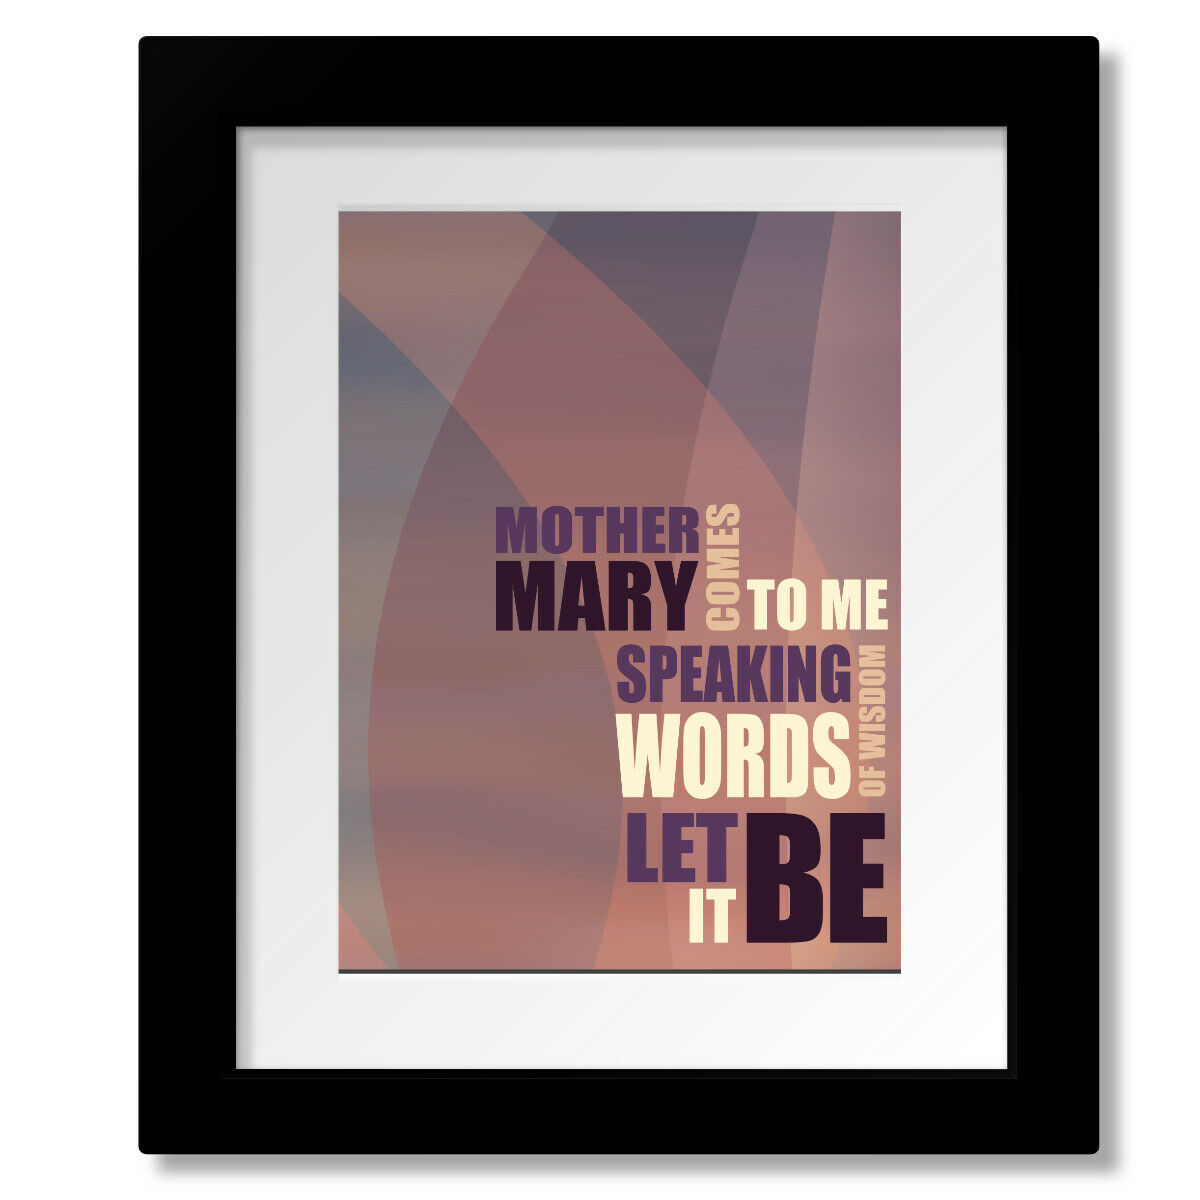 Rock Song Lyric Inspired Wall Print, Canvas or Plaque - Let It be by the Beatles